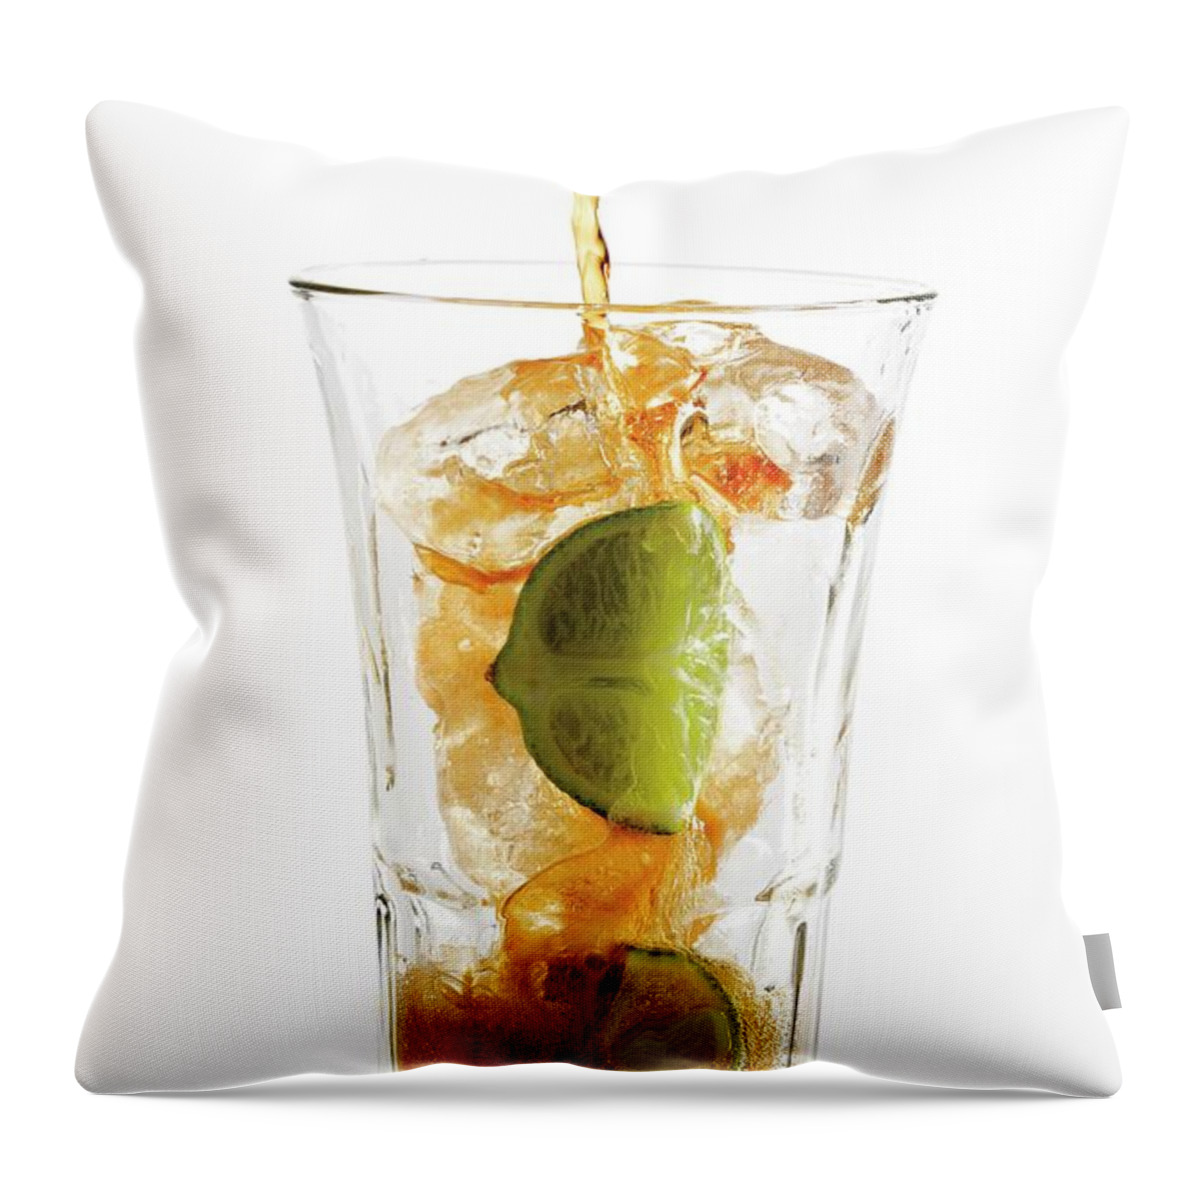 White Background Throw Pillow featuring the photograph Cuba Libre Drink, Close-up by Creativ Studio Heinemann